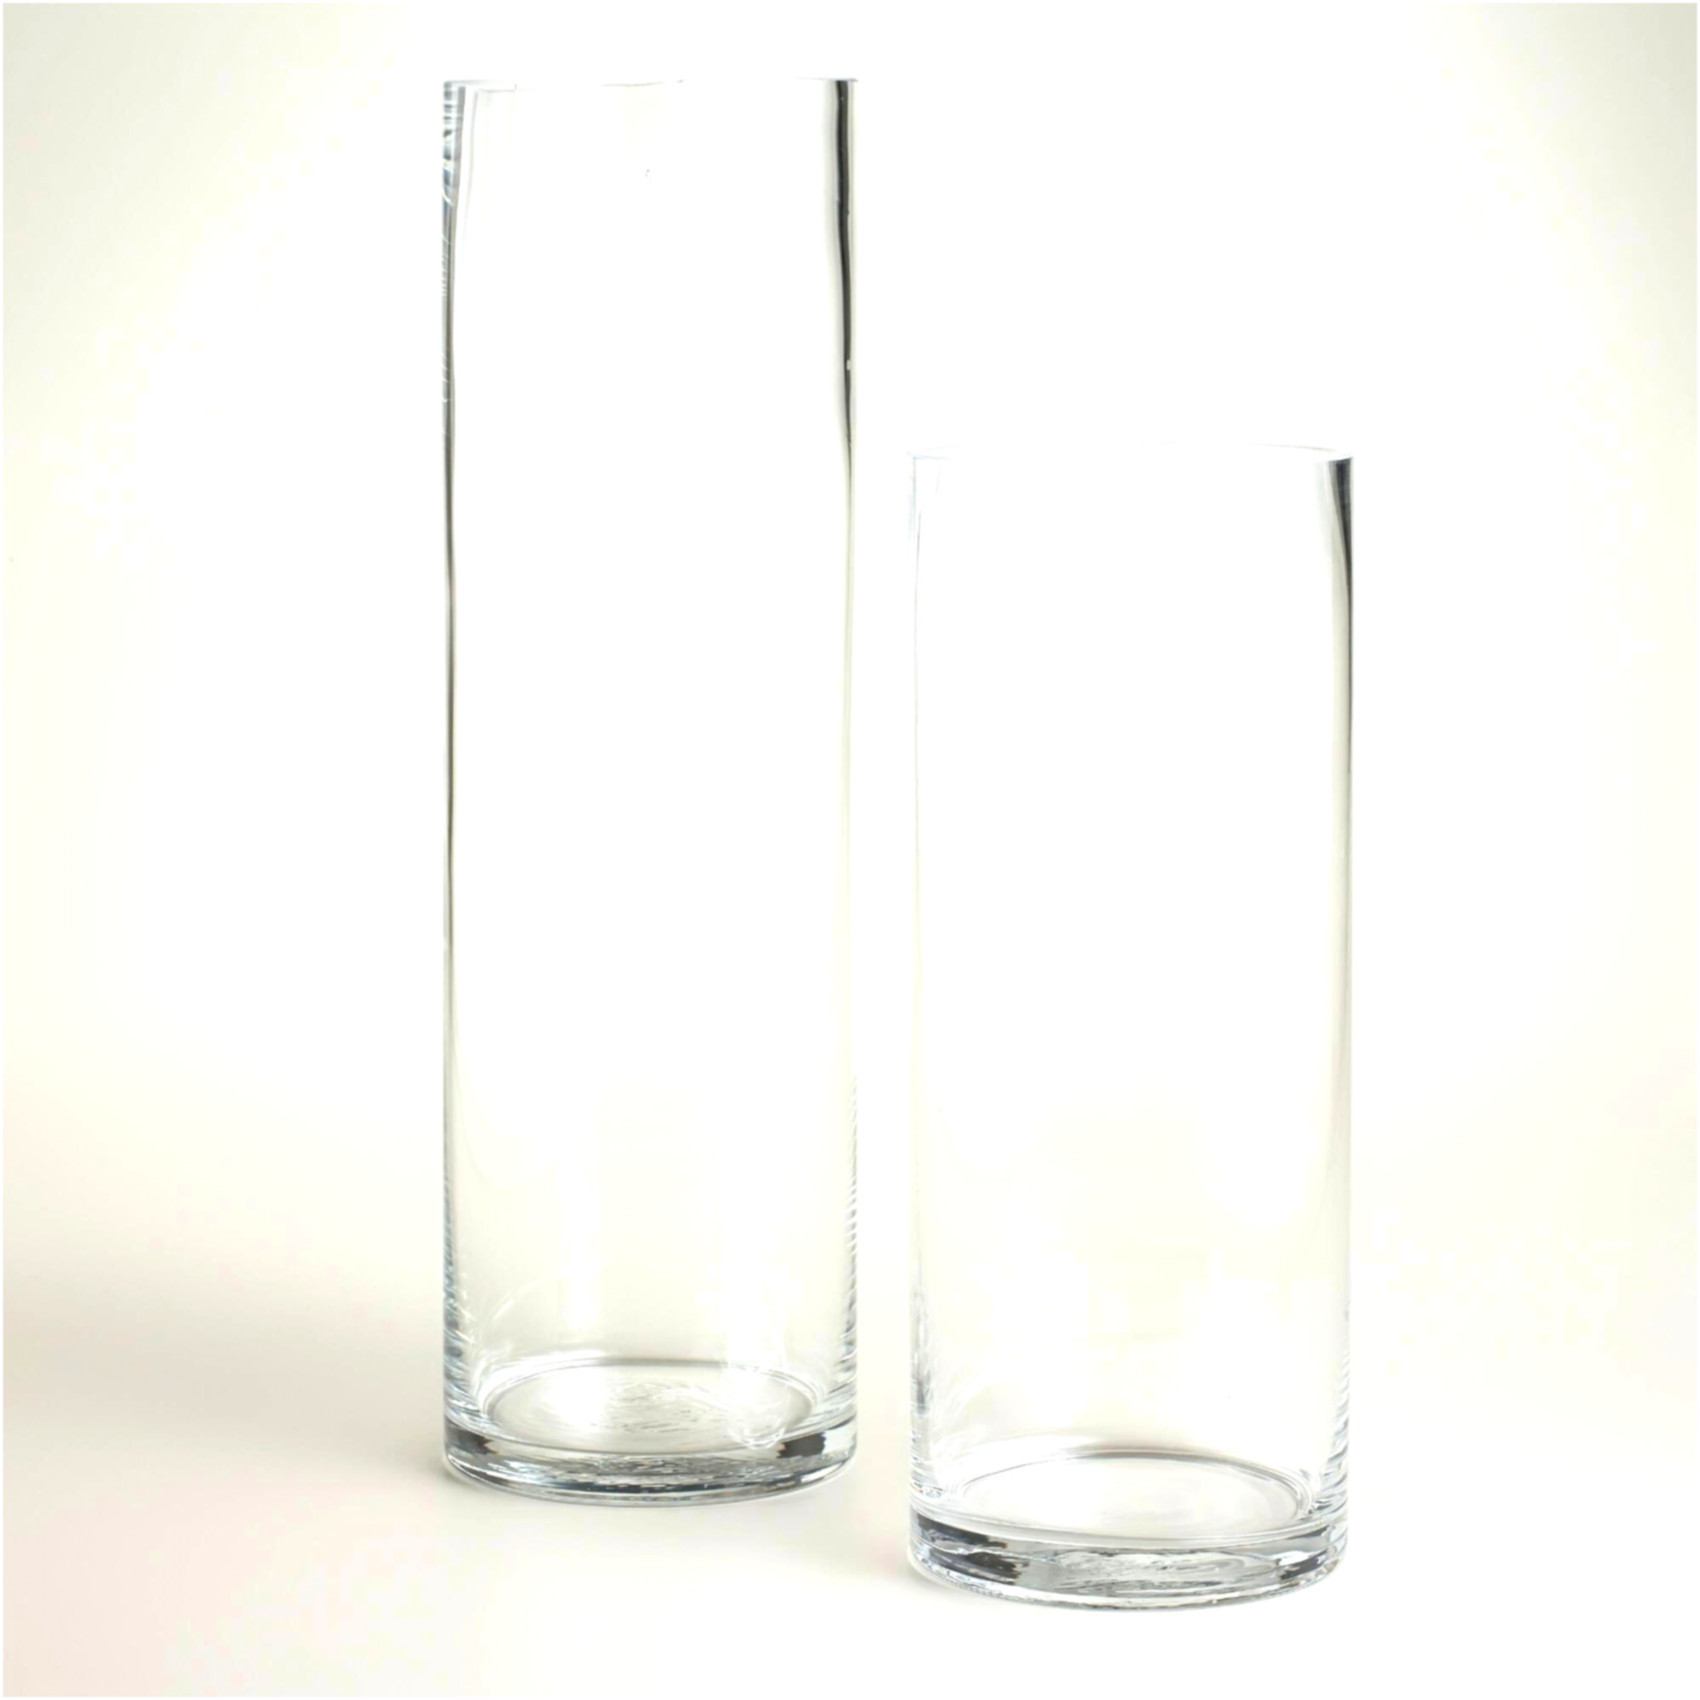 5 inch square vases bulk of why you should not go to glass vases wholesale glass vases regarding crystal glass vases wholesale inspirational 30 elegant vases with